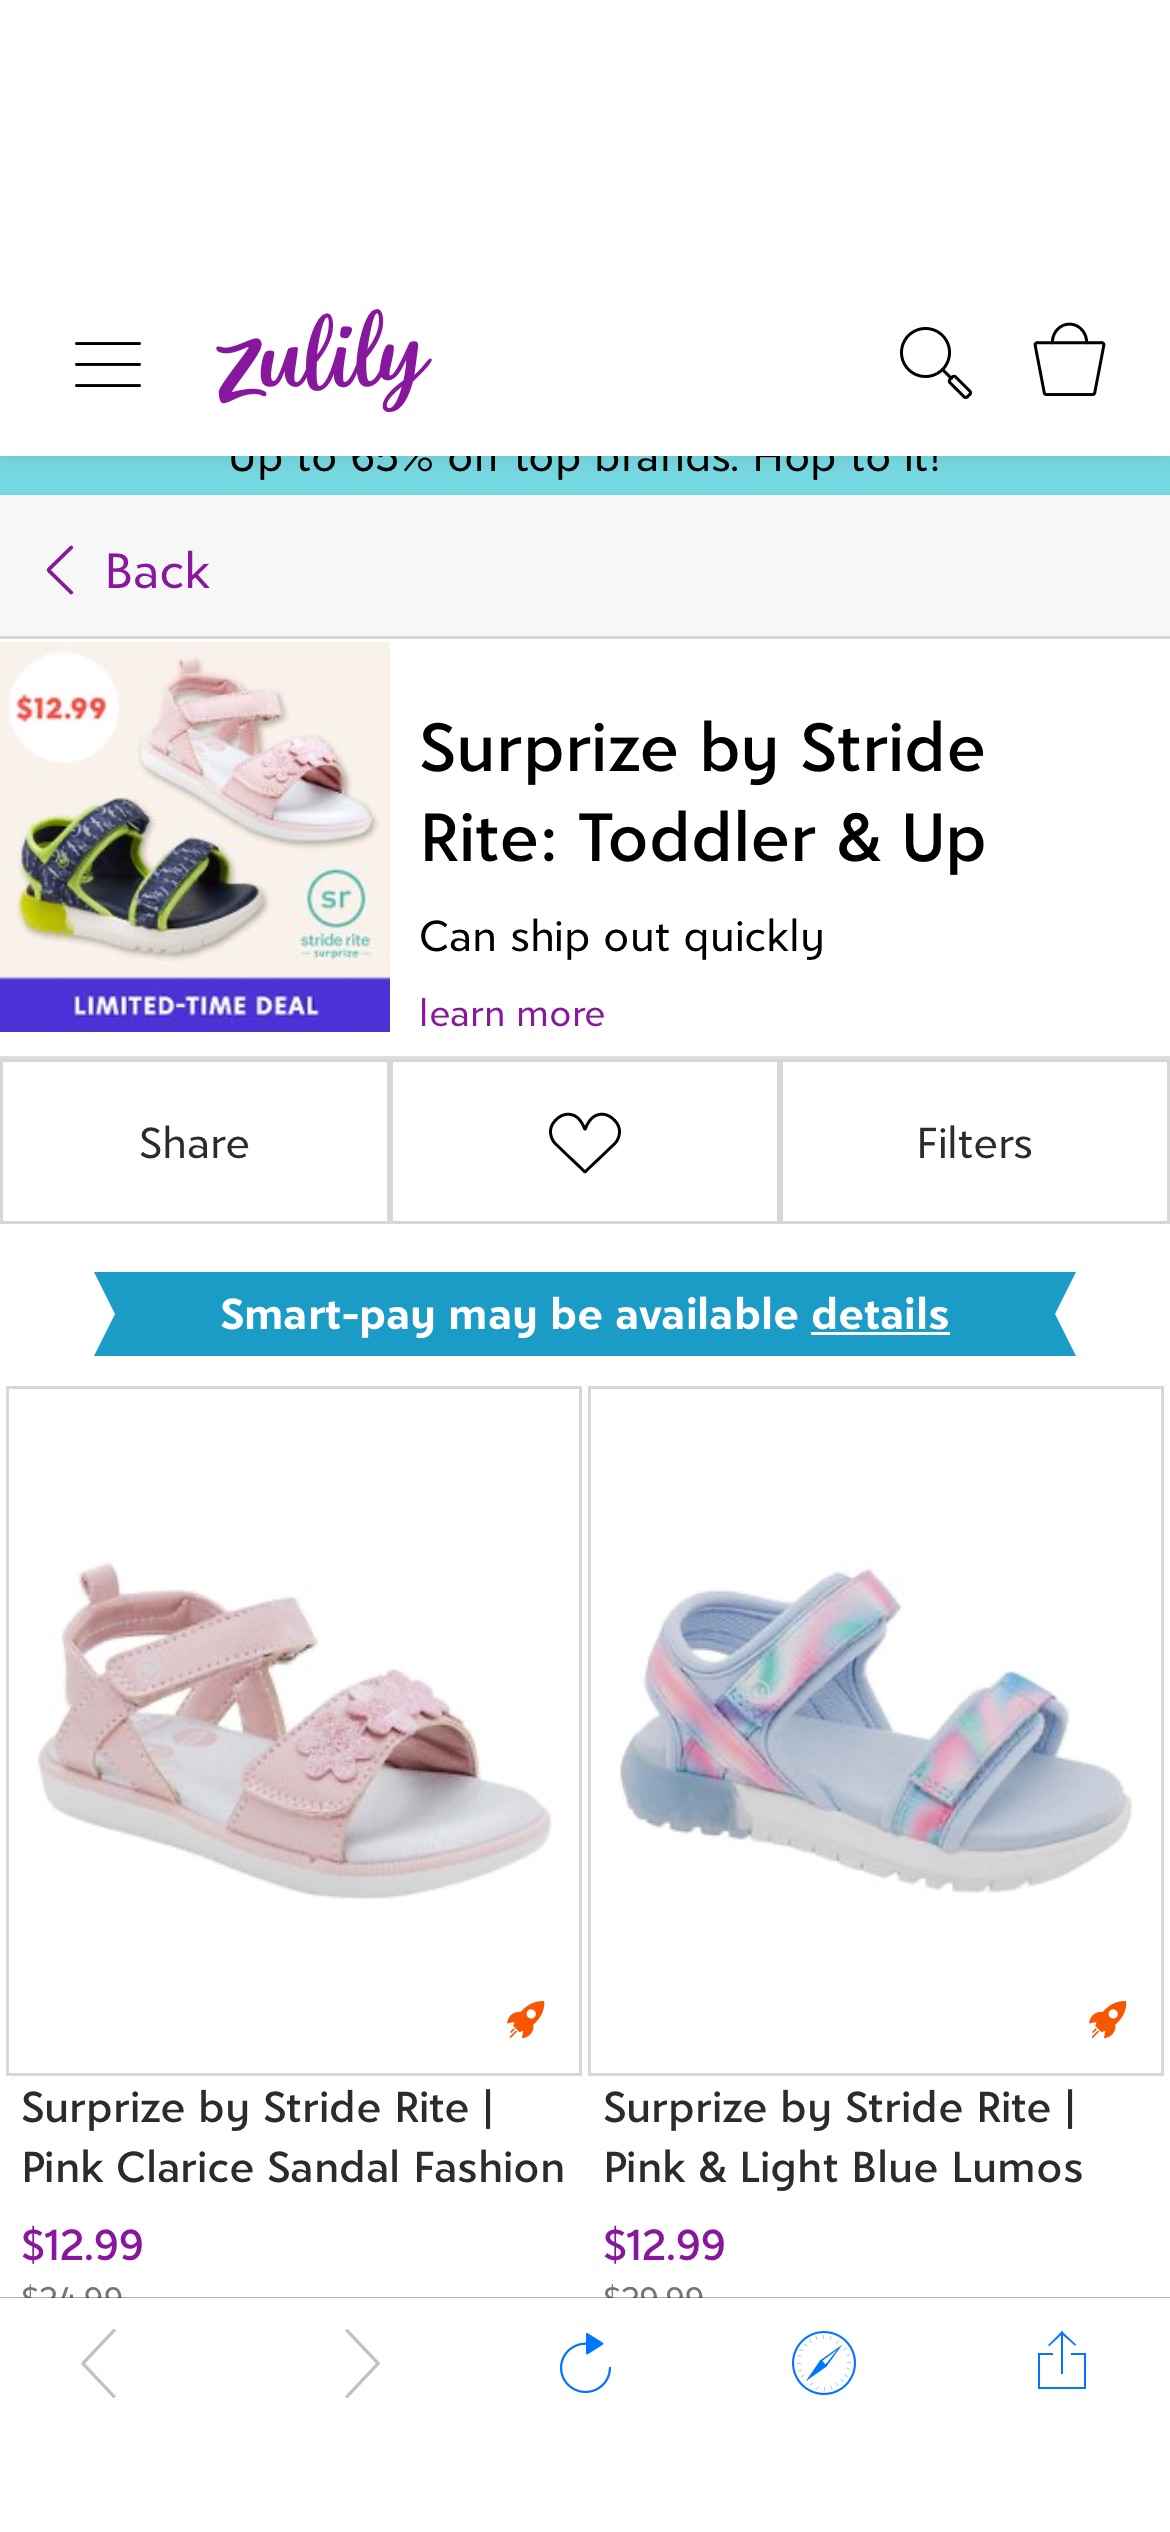 Surprize by Stride Rite: Toddler & Up | Zulily 凉鞋 $12.99